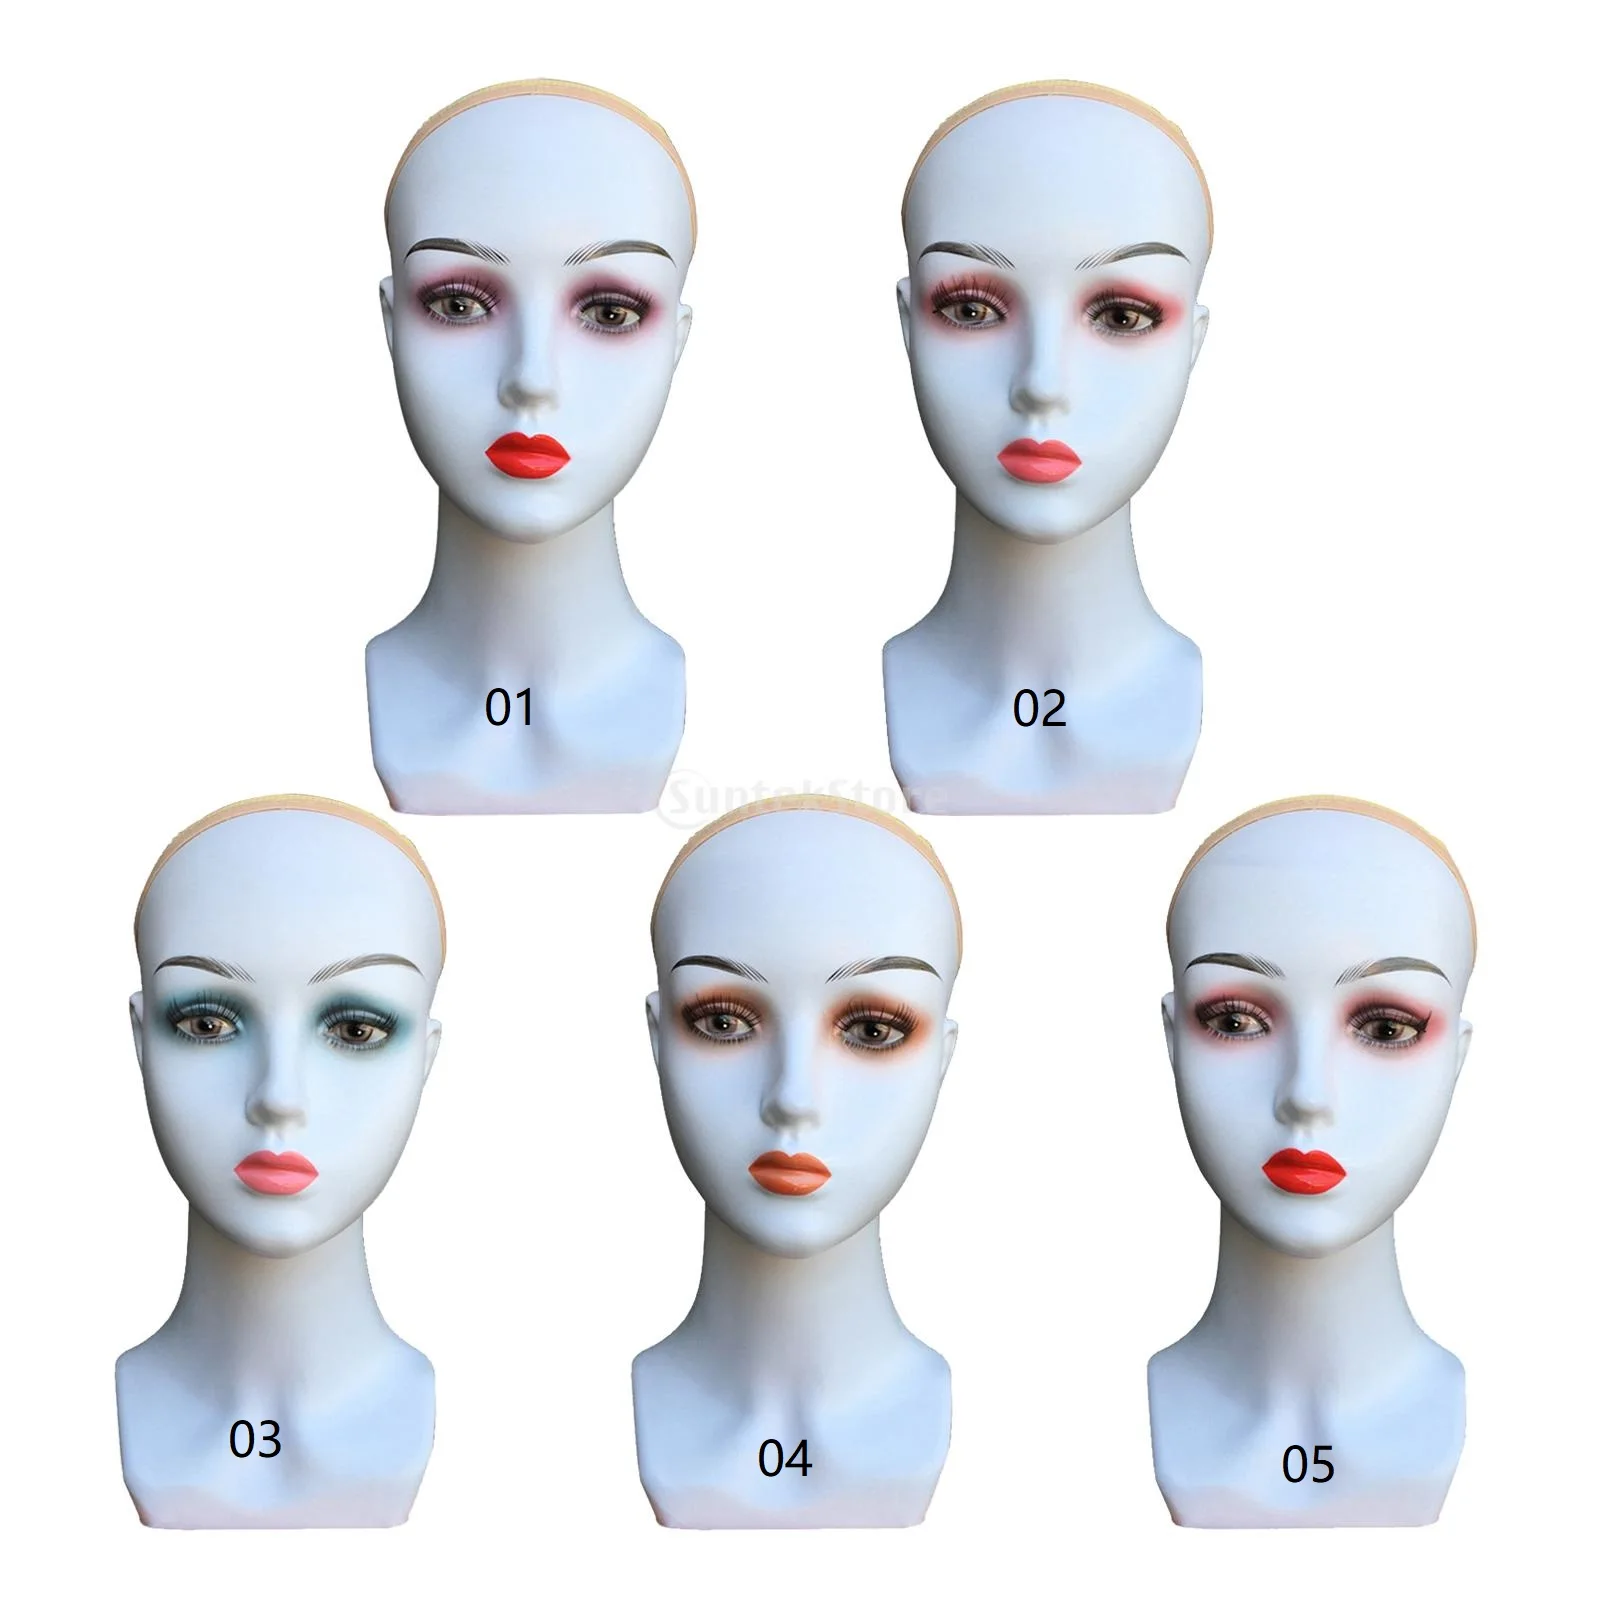 Hair Mannequin Heads .For Hair Training Styling .Professional .Hairdressing Cosmetology. Dolls, Heads ,For Hairstyles